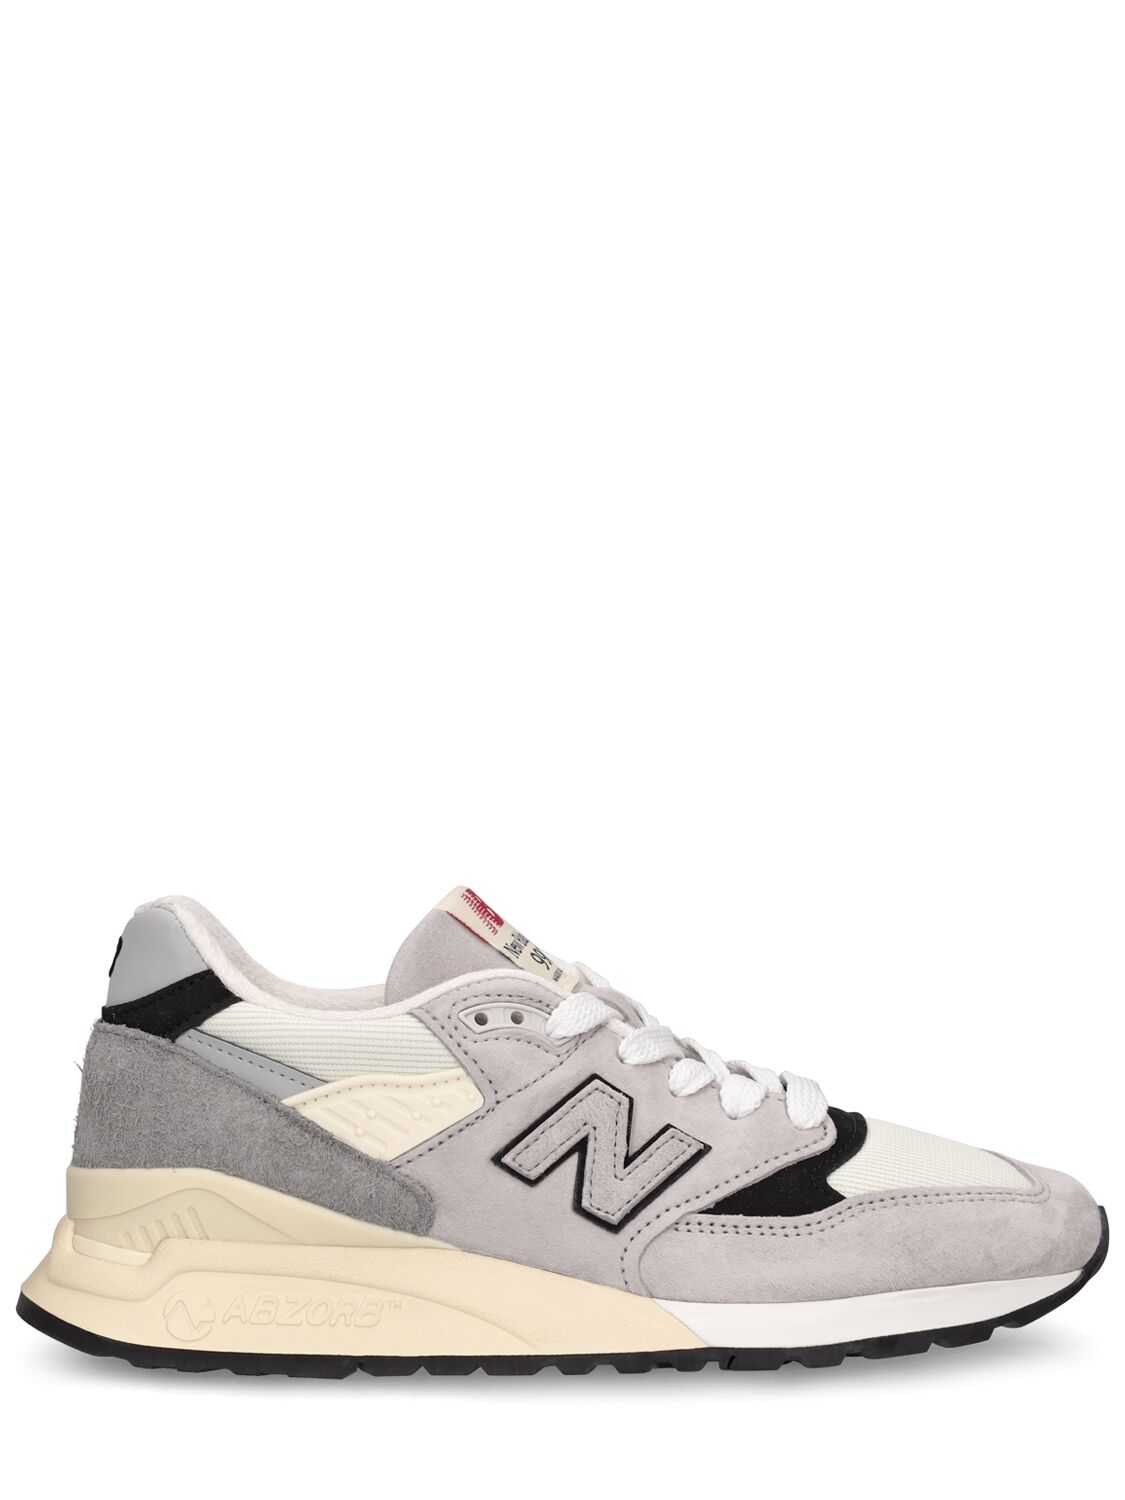 NEW BALANCE 998 MADE IN USA trainers